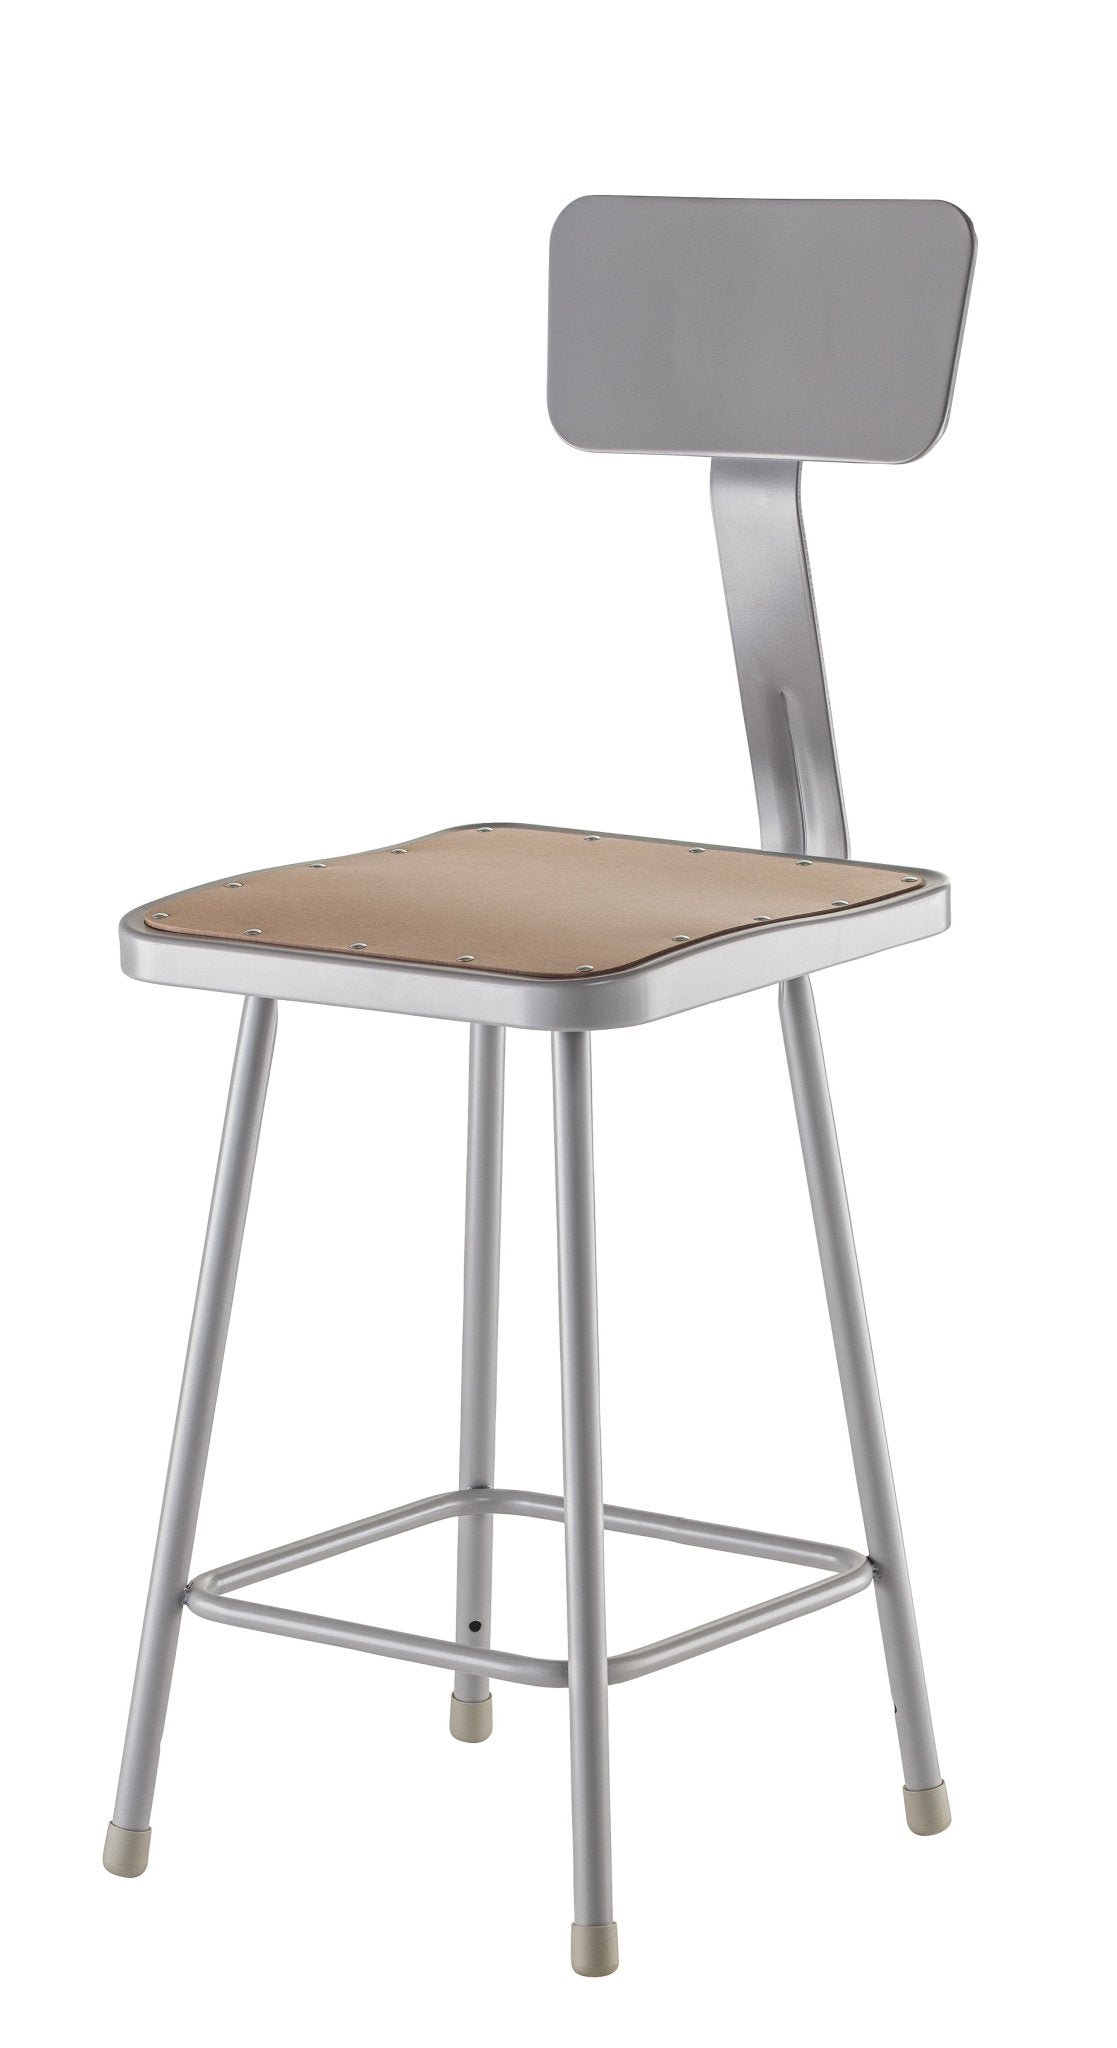 NPS 24" H Square Stool with Hardboard Seat & Backrest (National Public Seating NPS-6324B) - SchoolOutlet